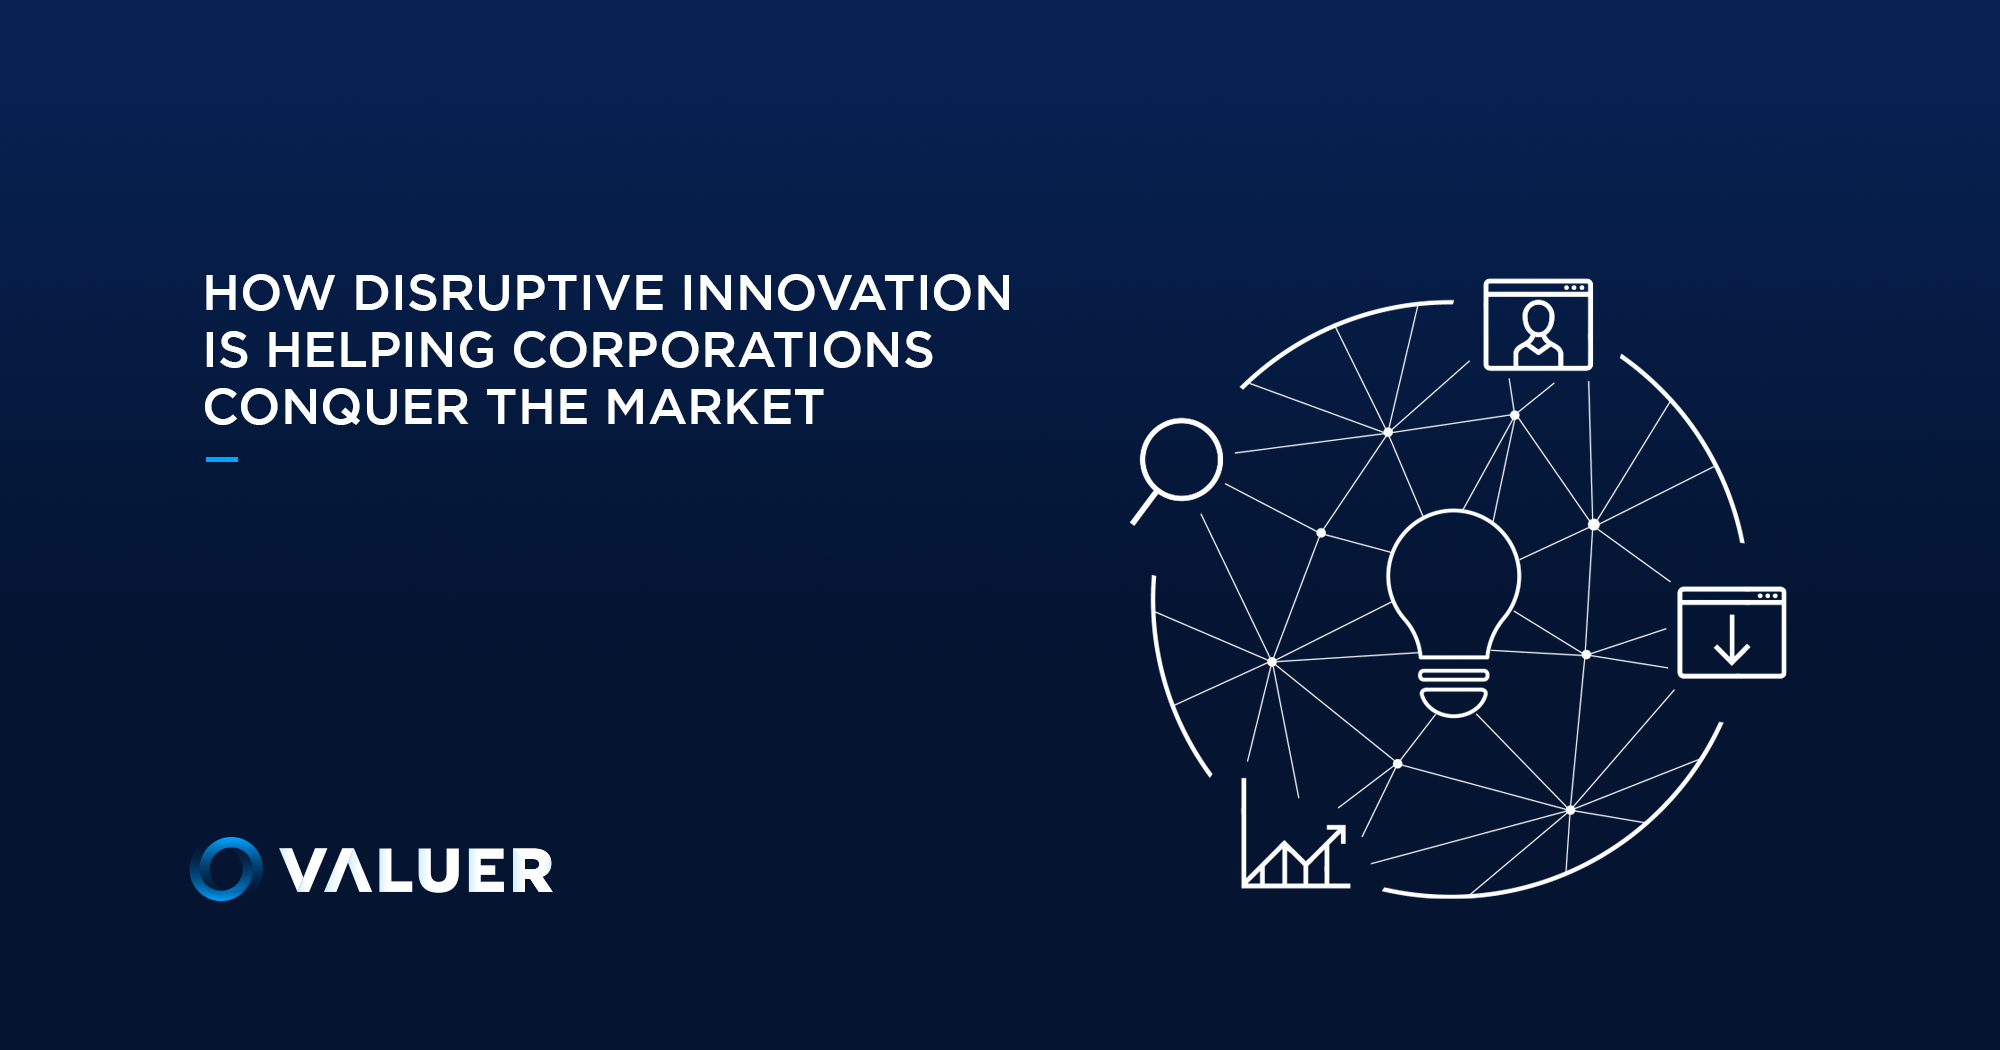 How Disruptive Innovation Is Helping Corporations Conquer the Market